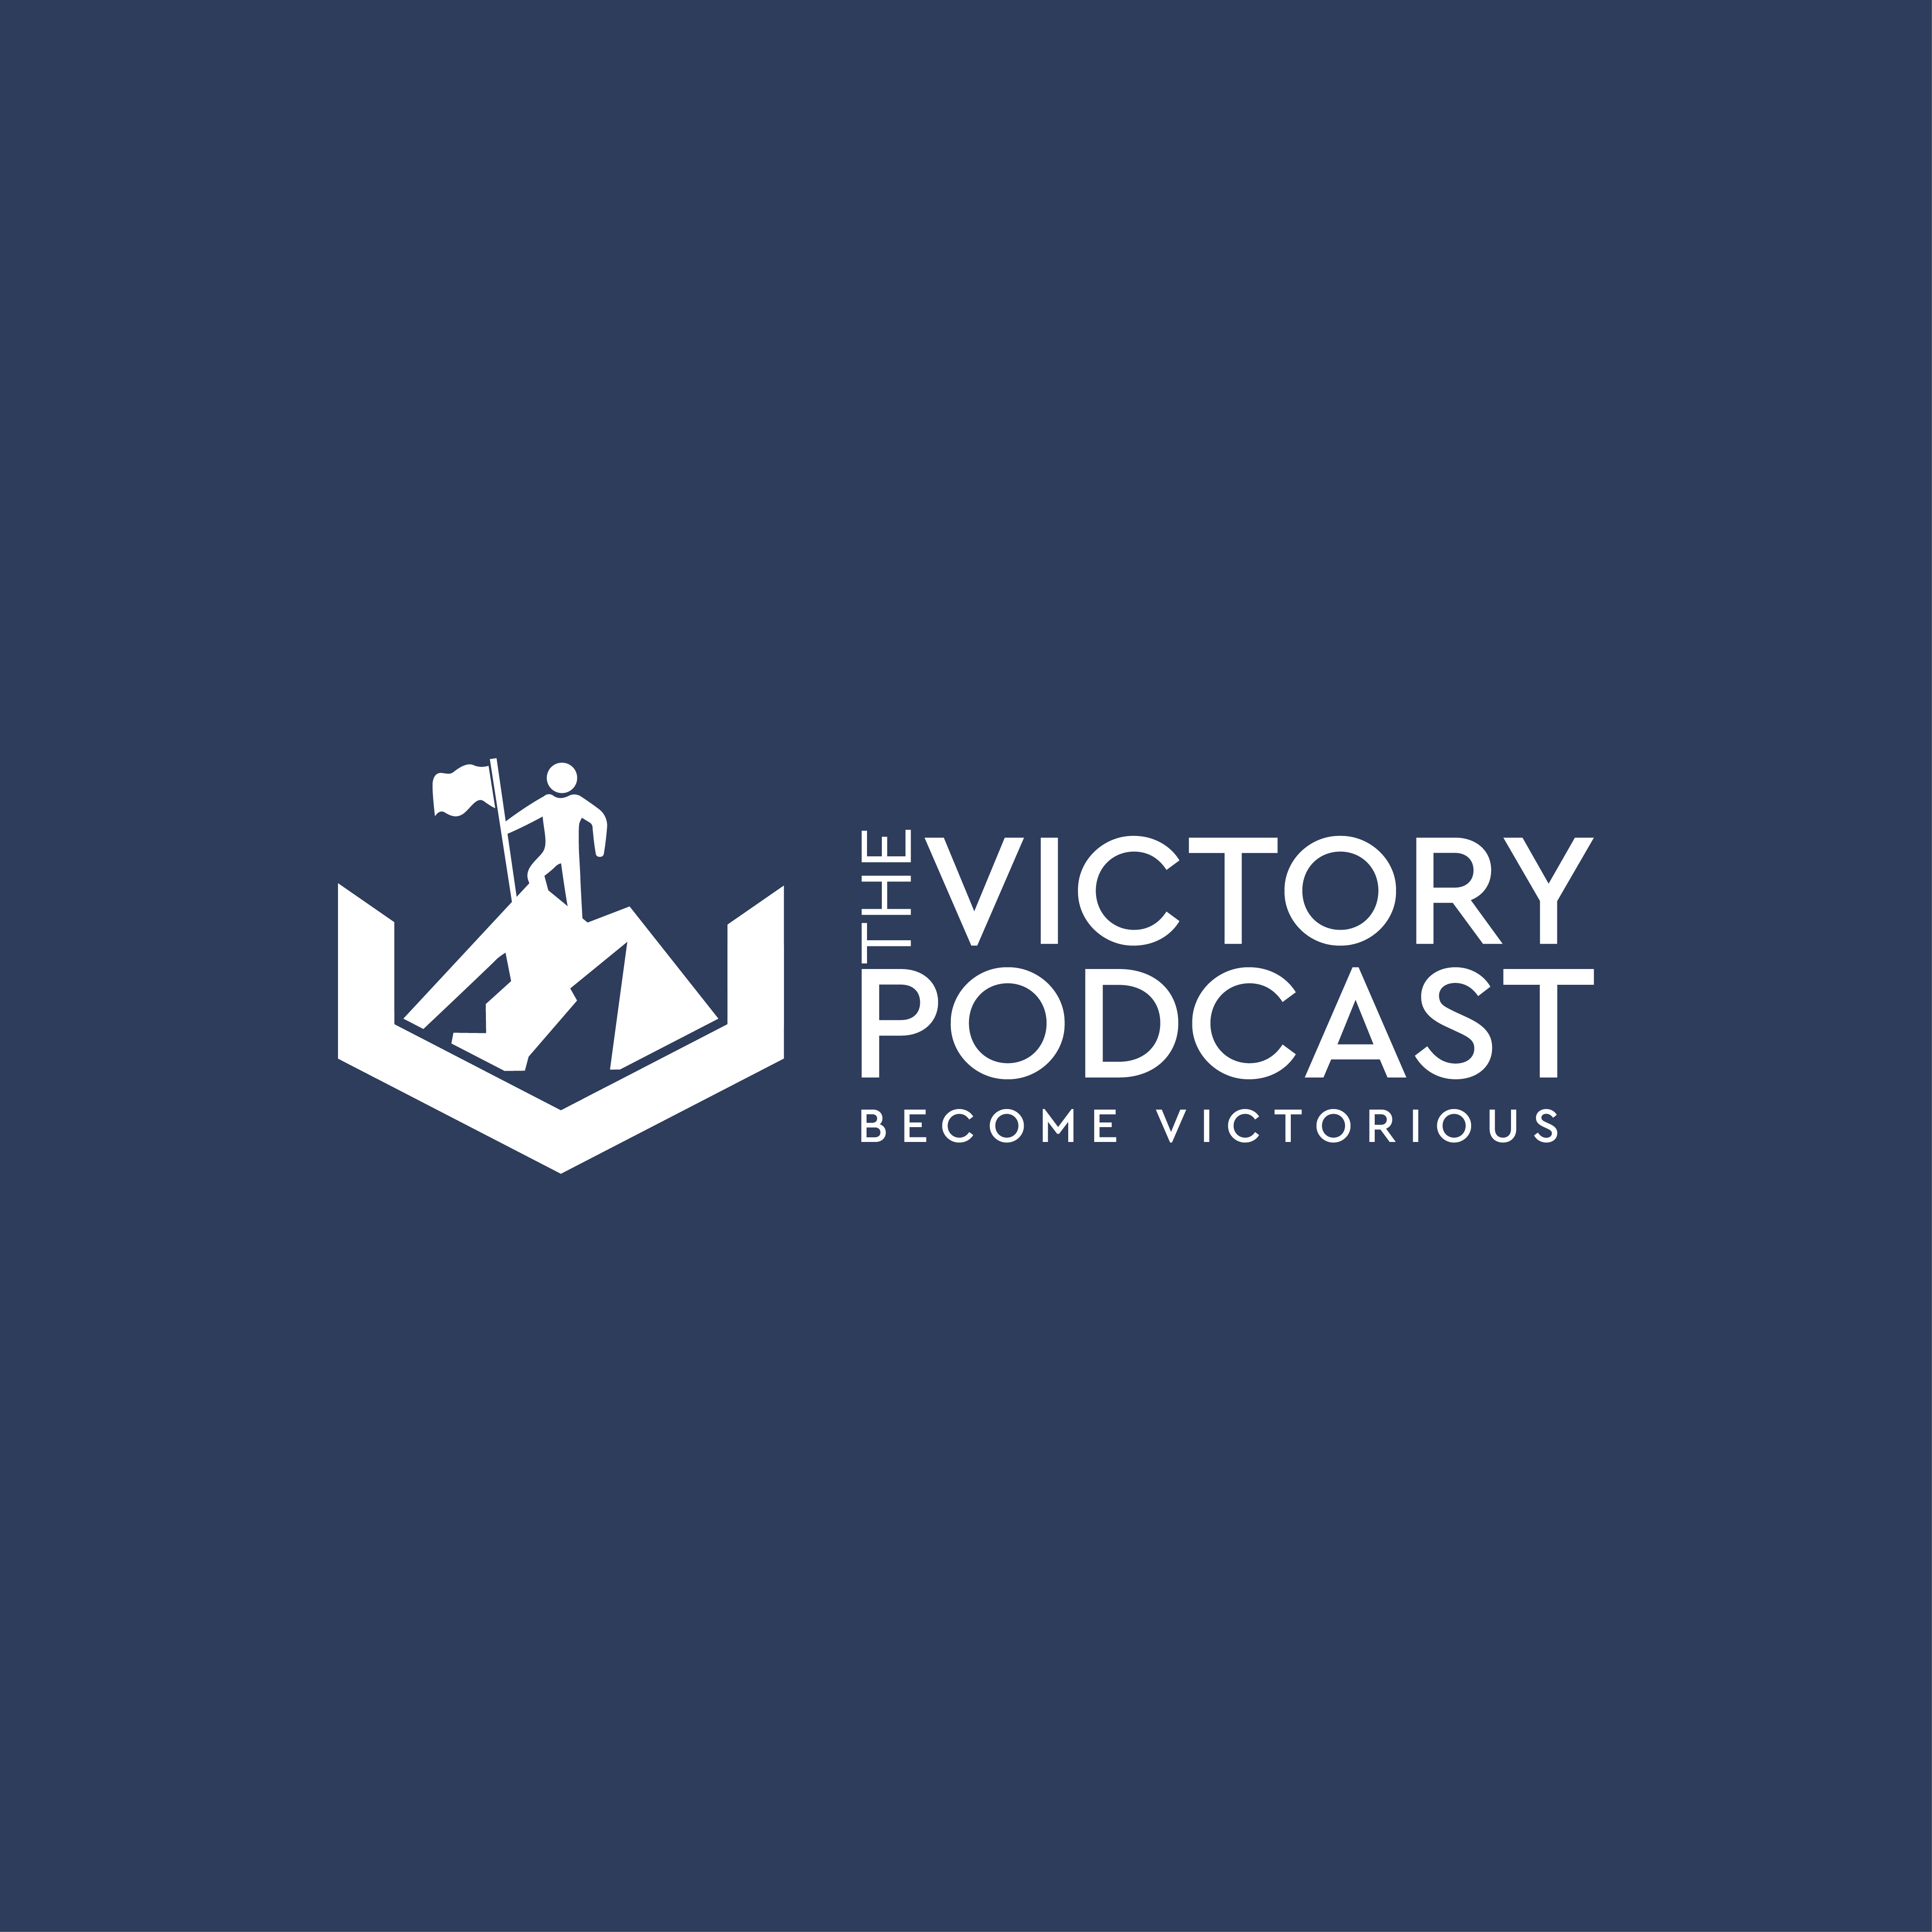 The Victory Podcast